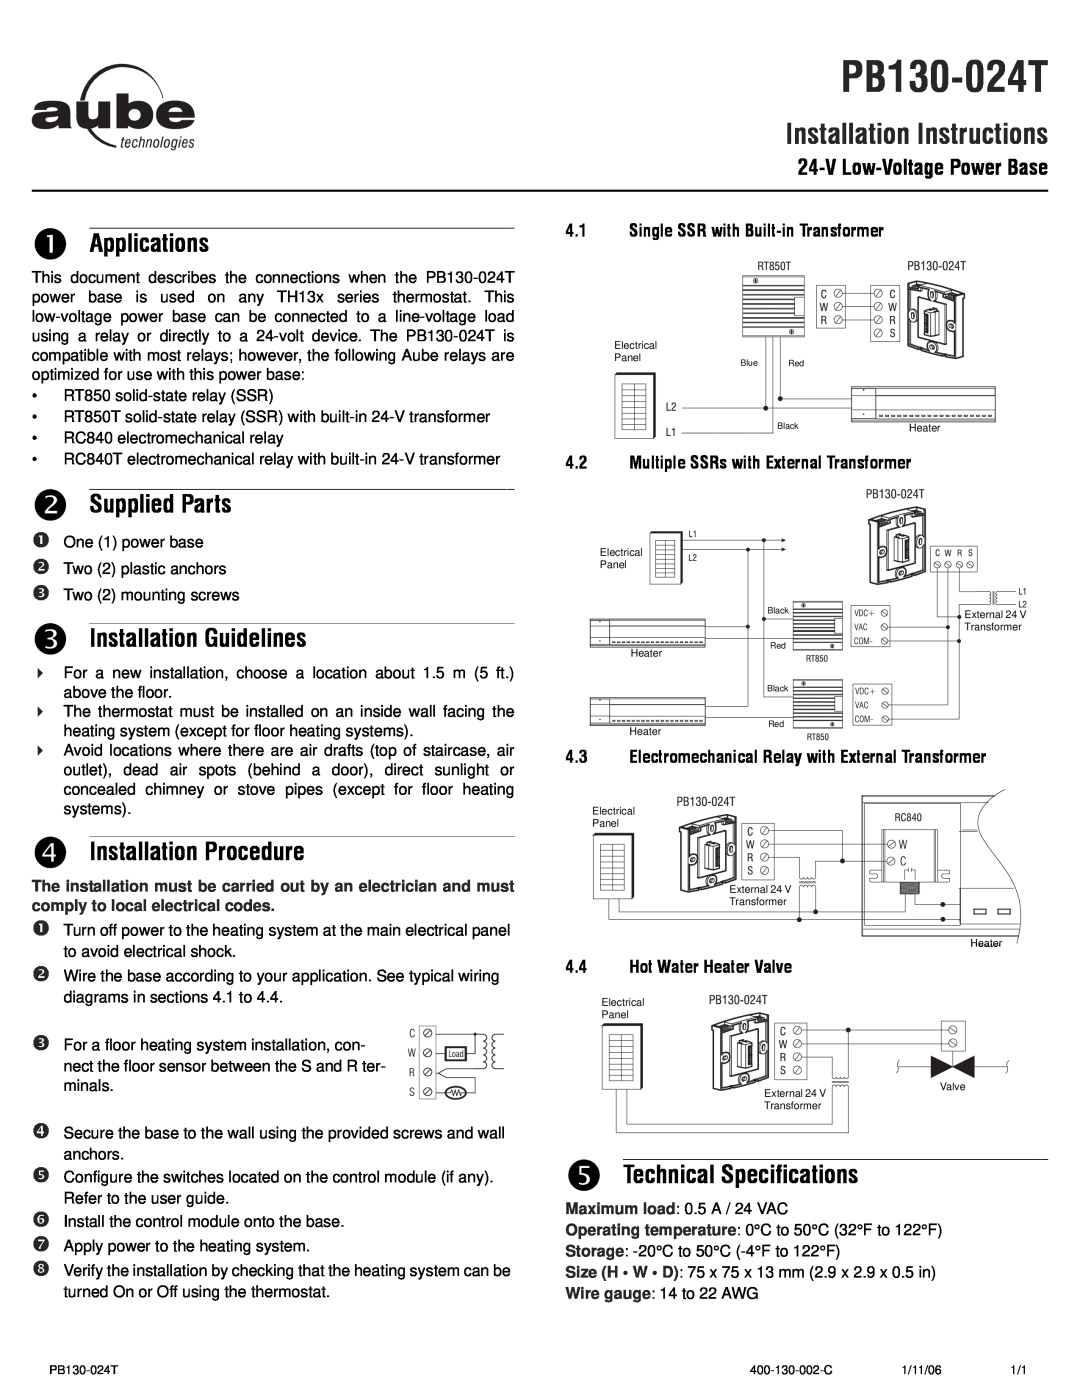 Aube Technologies TH133 n Applications, o Supplied Parts, p Installation Guidelines, q Installation Procedure, PB130-024T 